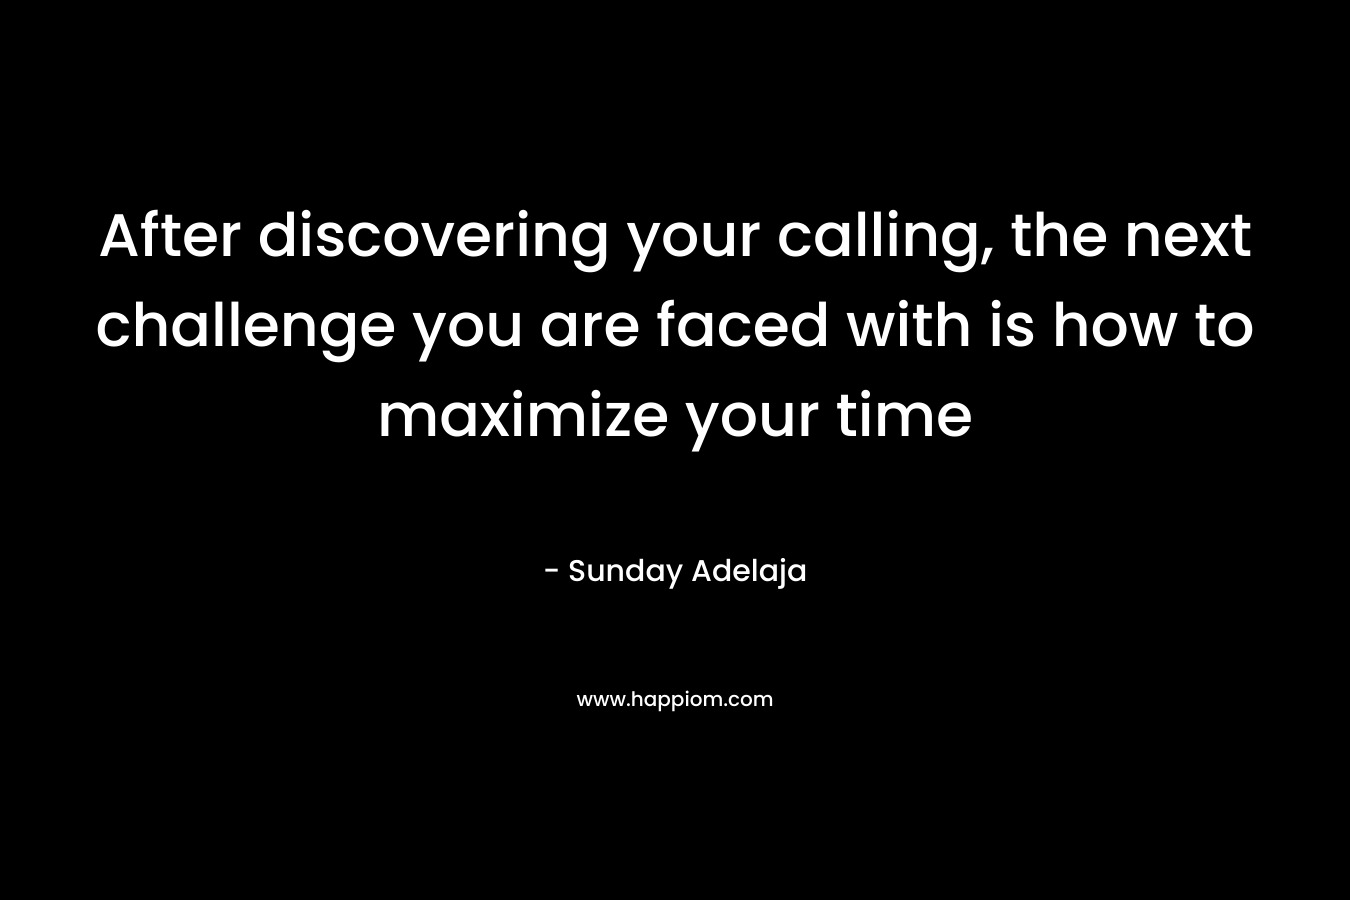 After discovering your calling, the next challenge you are faced with is how to maximize your time